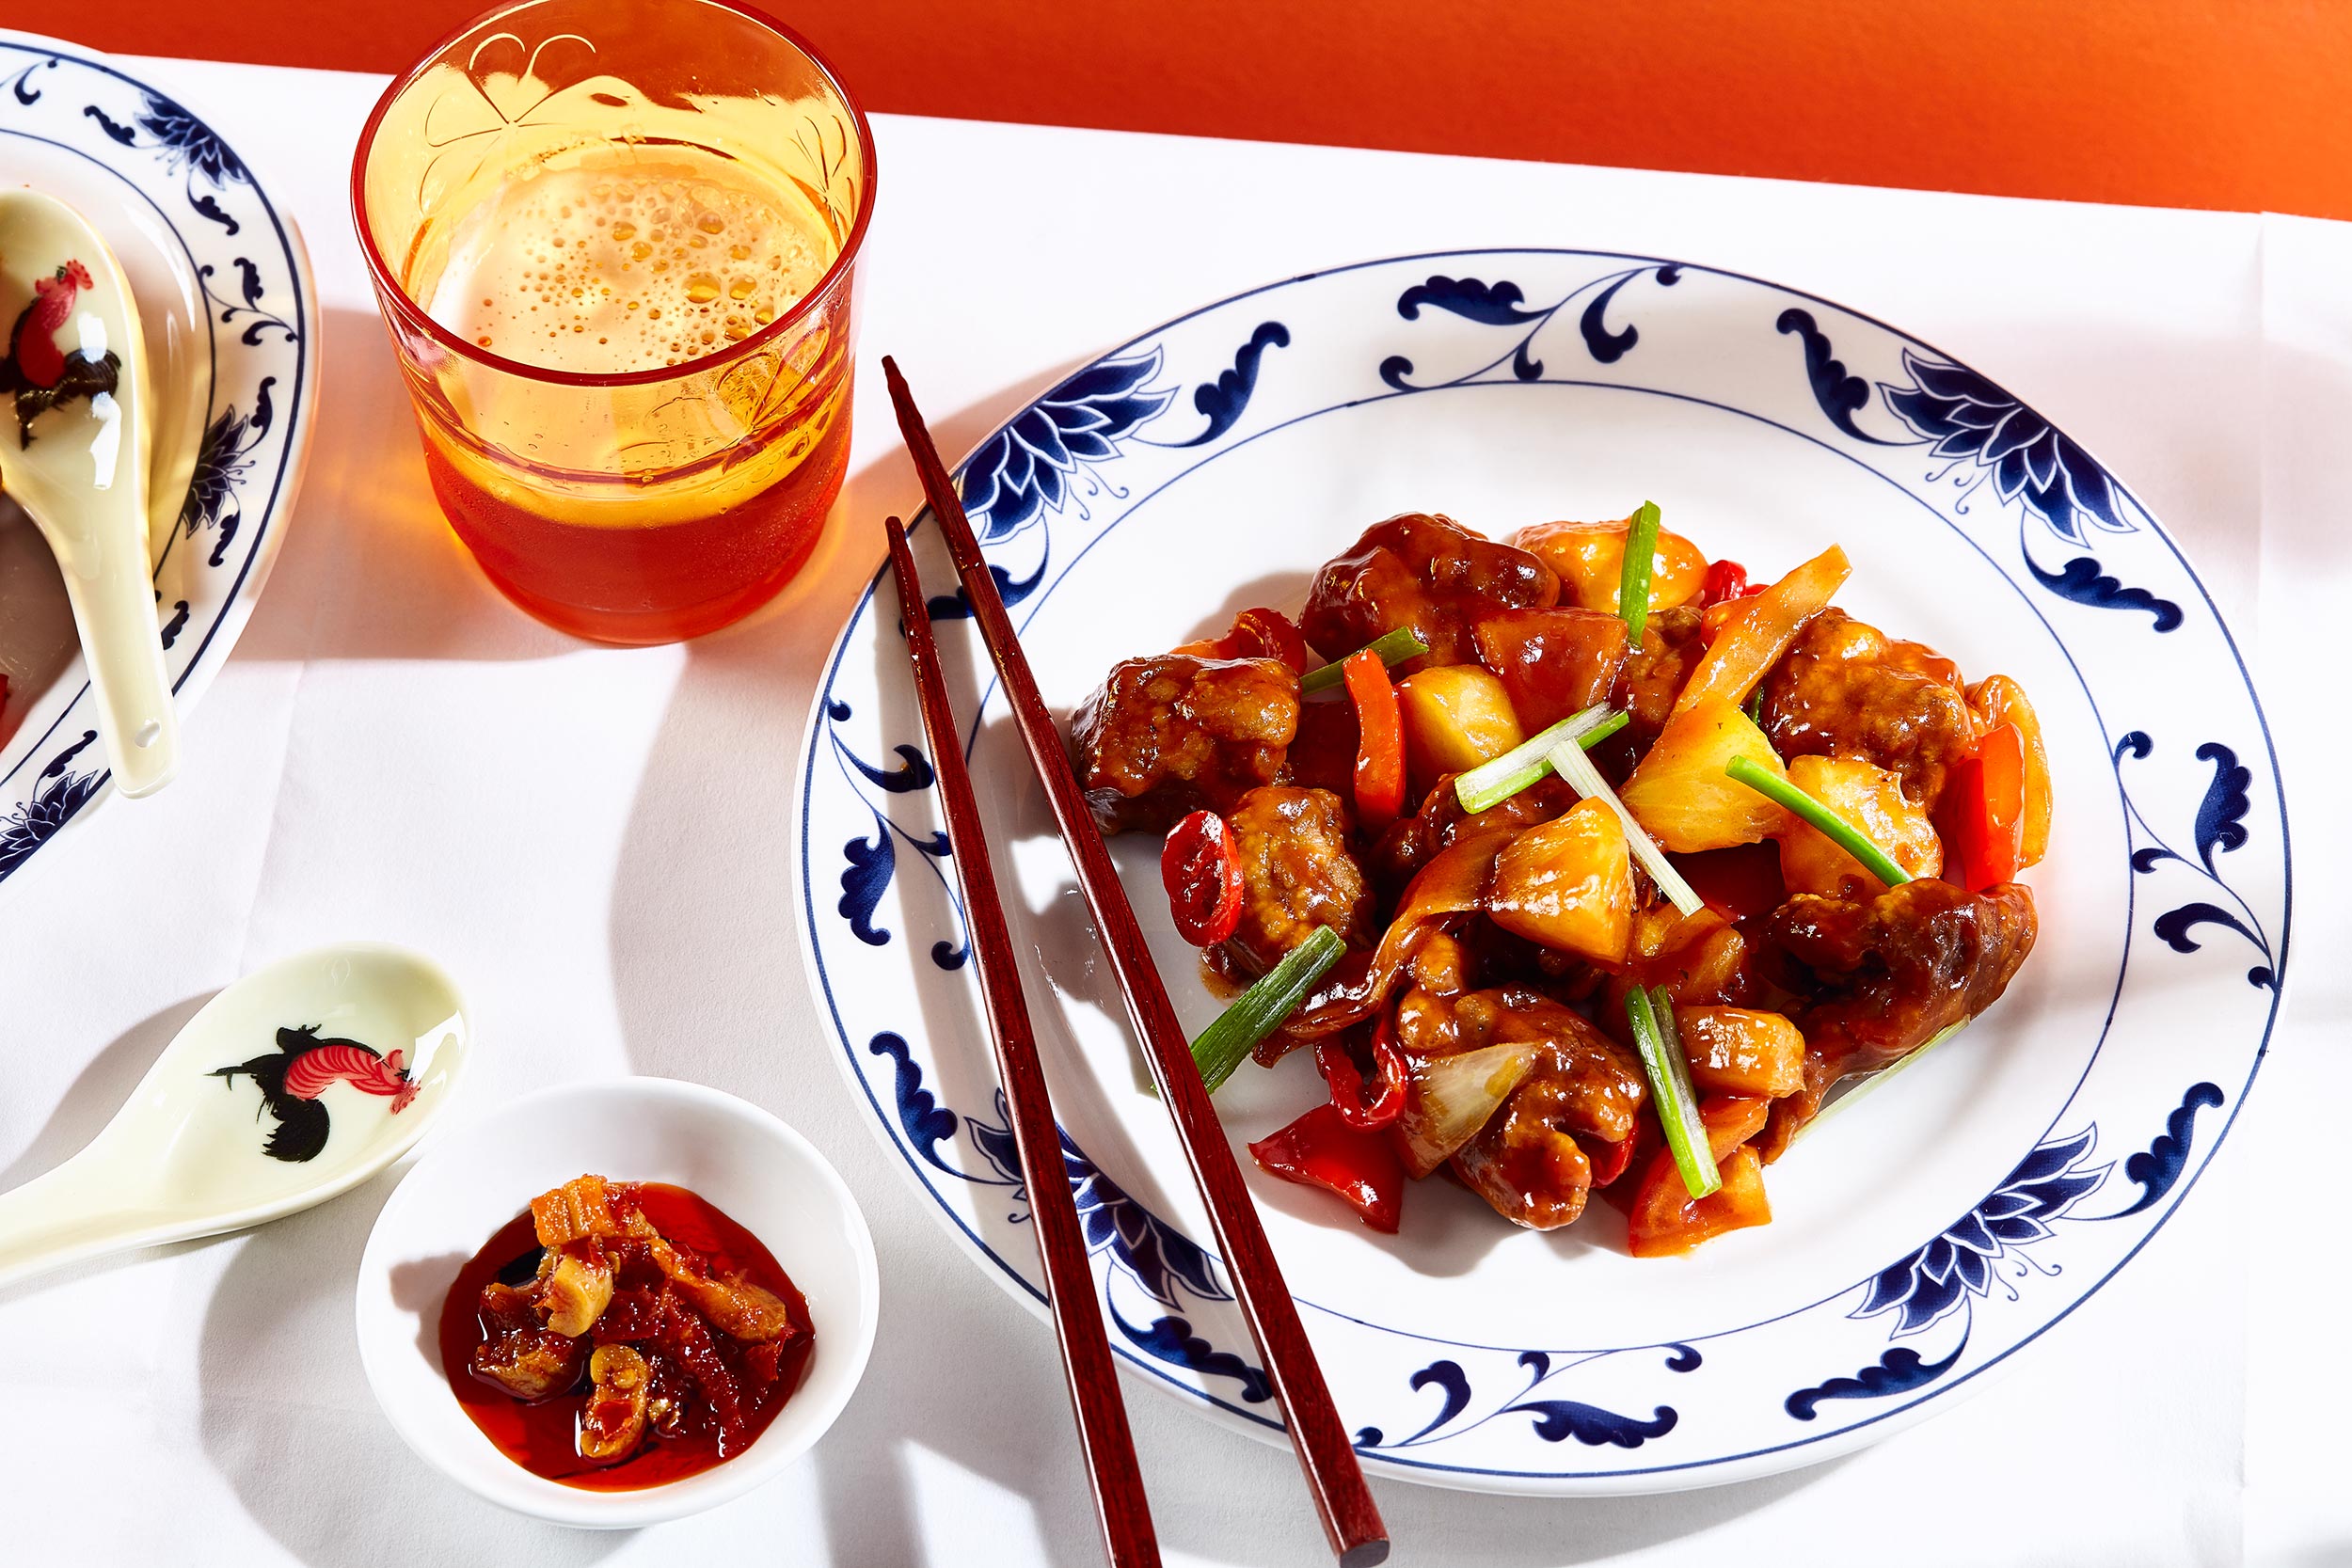 Sweet and Sour Pork, Steamed rice, fermented pickled radish, Glasgow food and drink photographer Alastair Ferrier